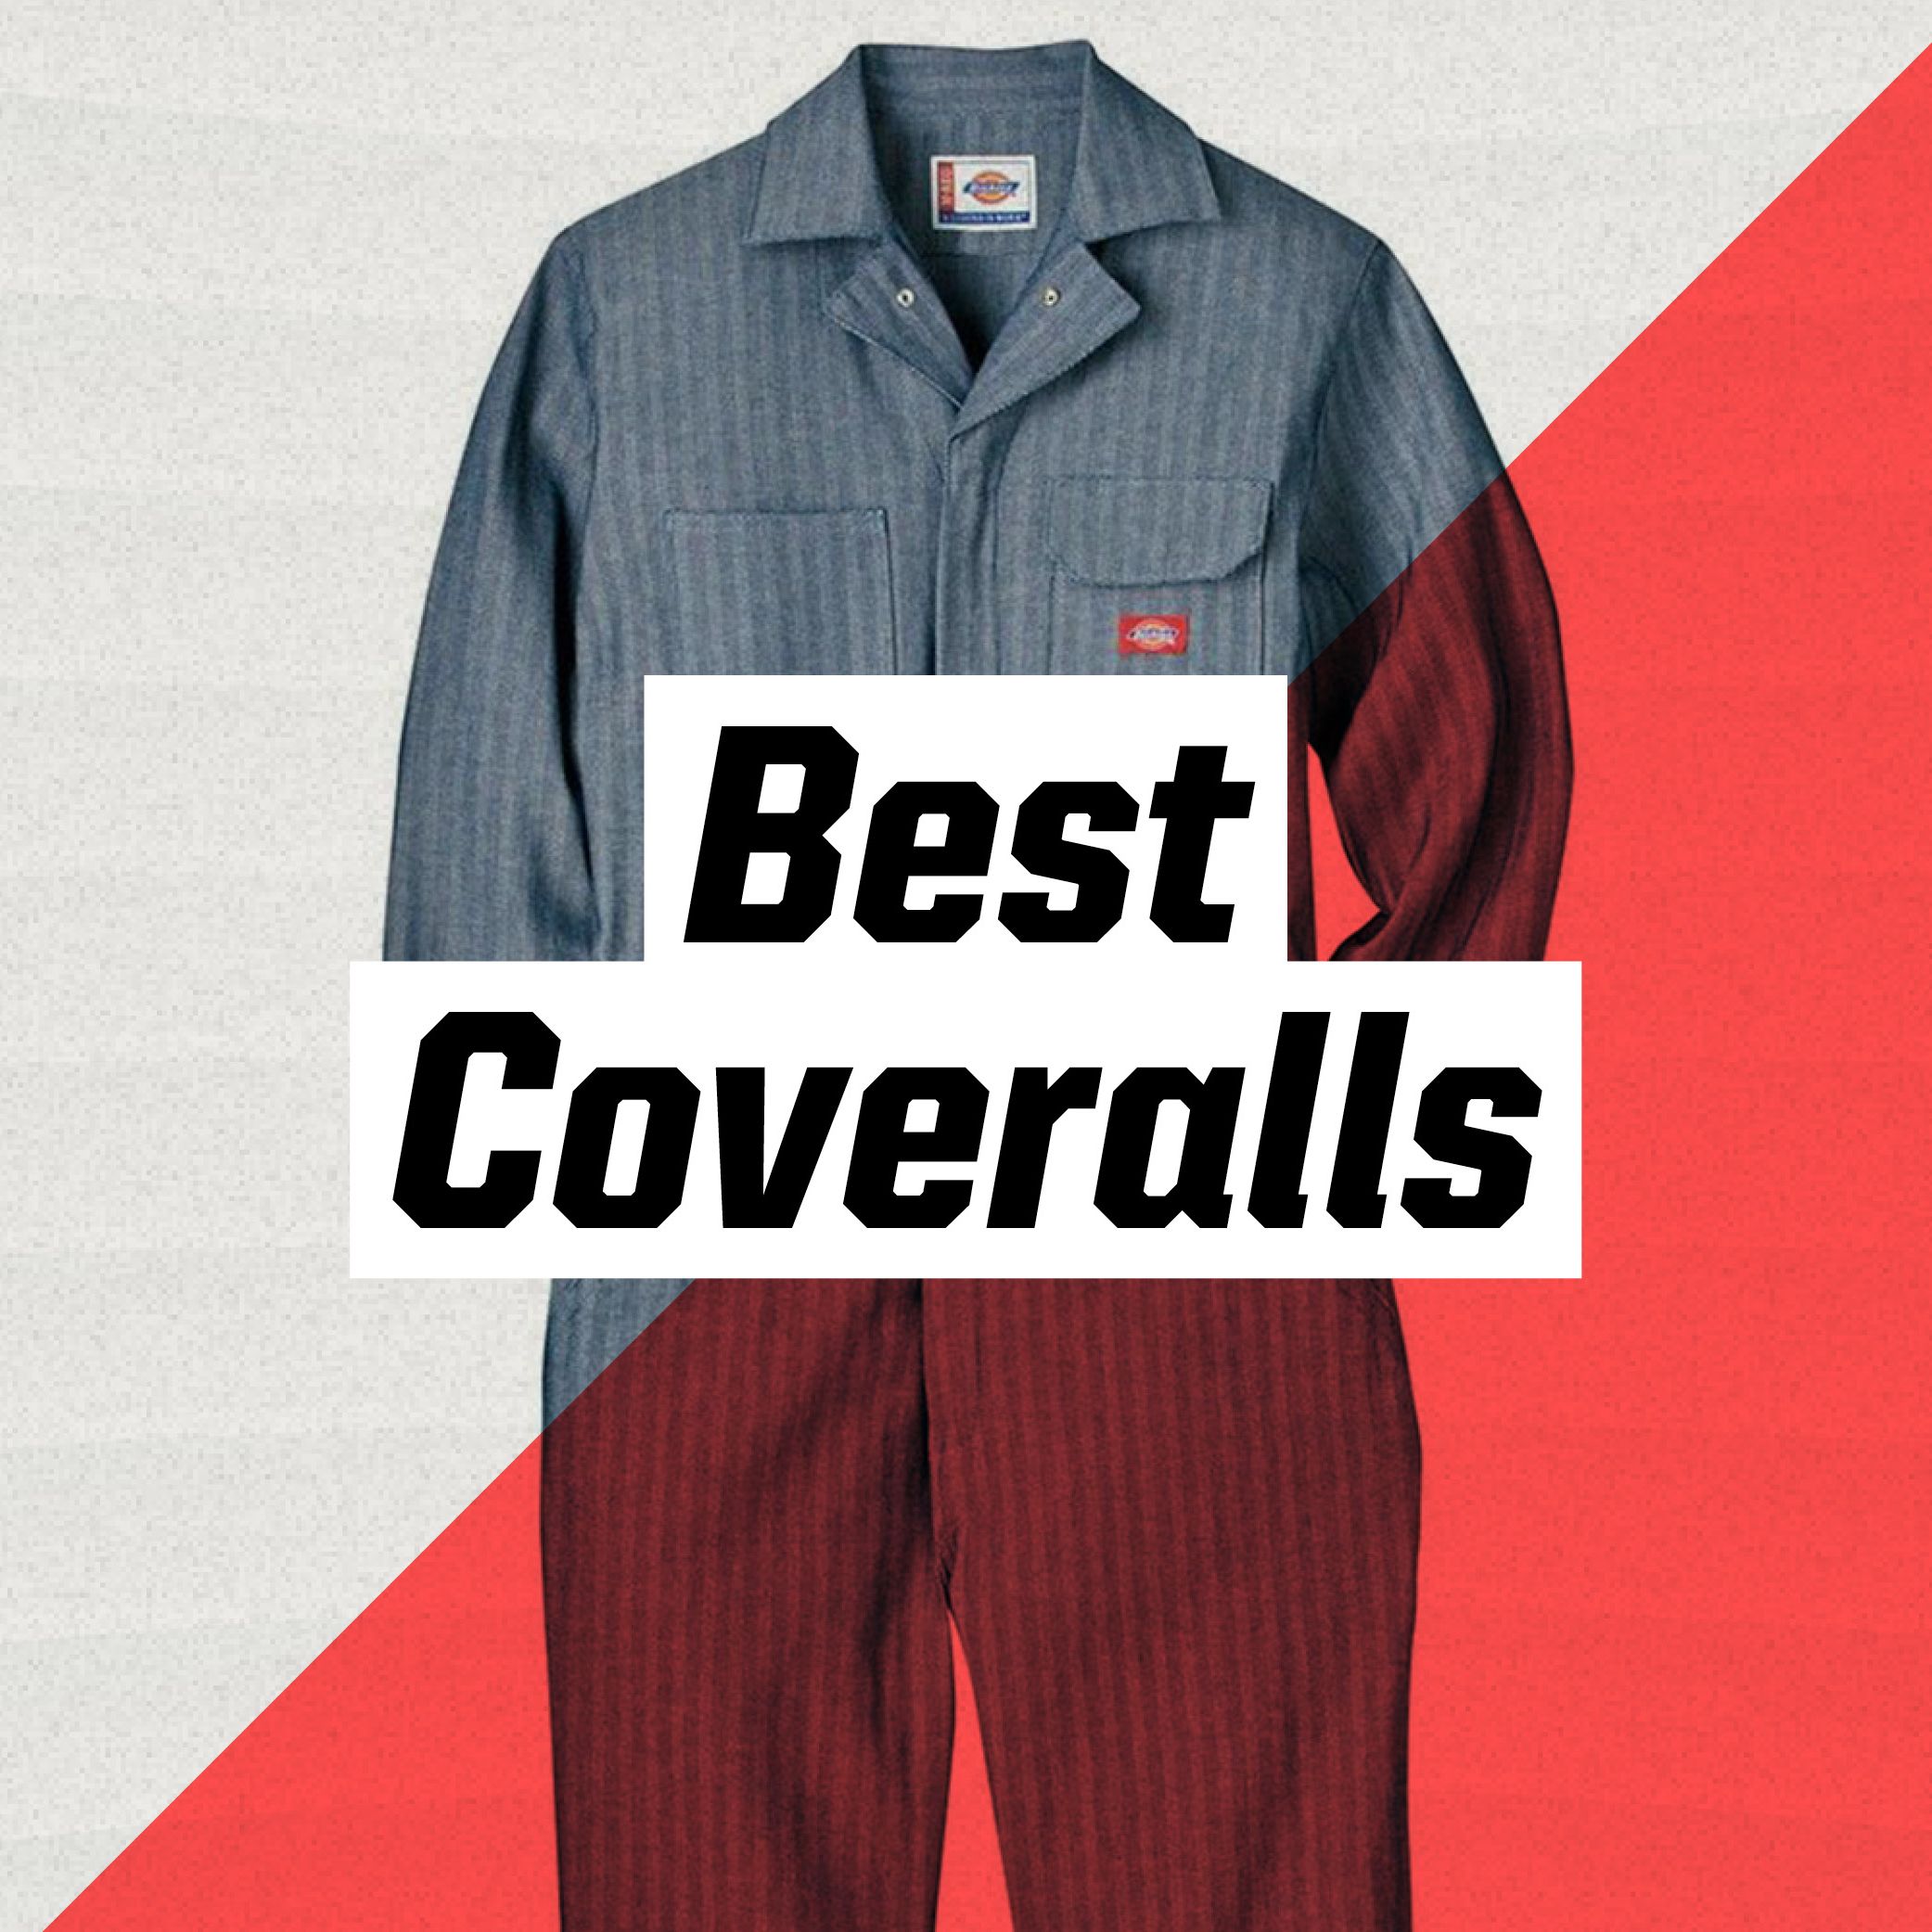 The Best Coveralls and How to Choose the Right One